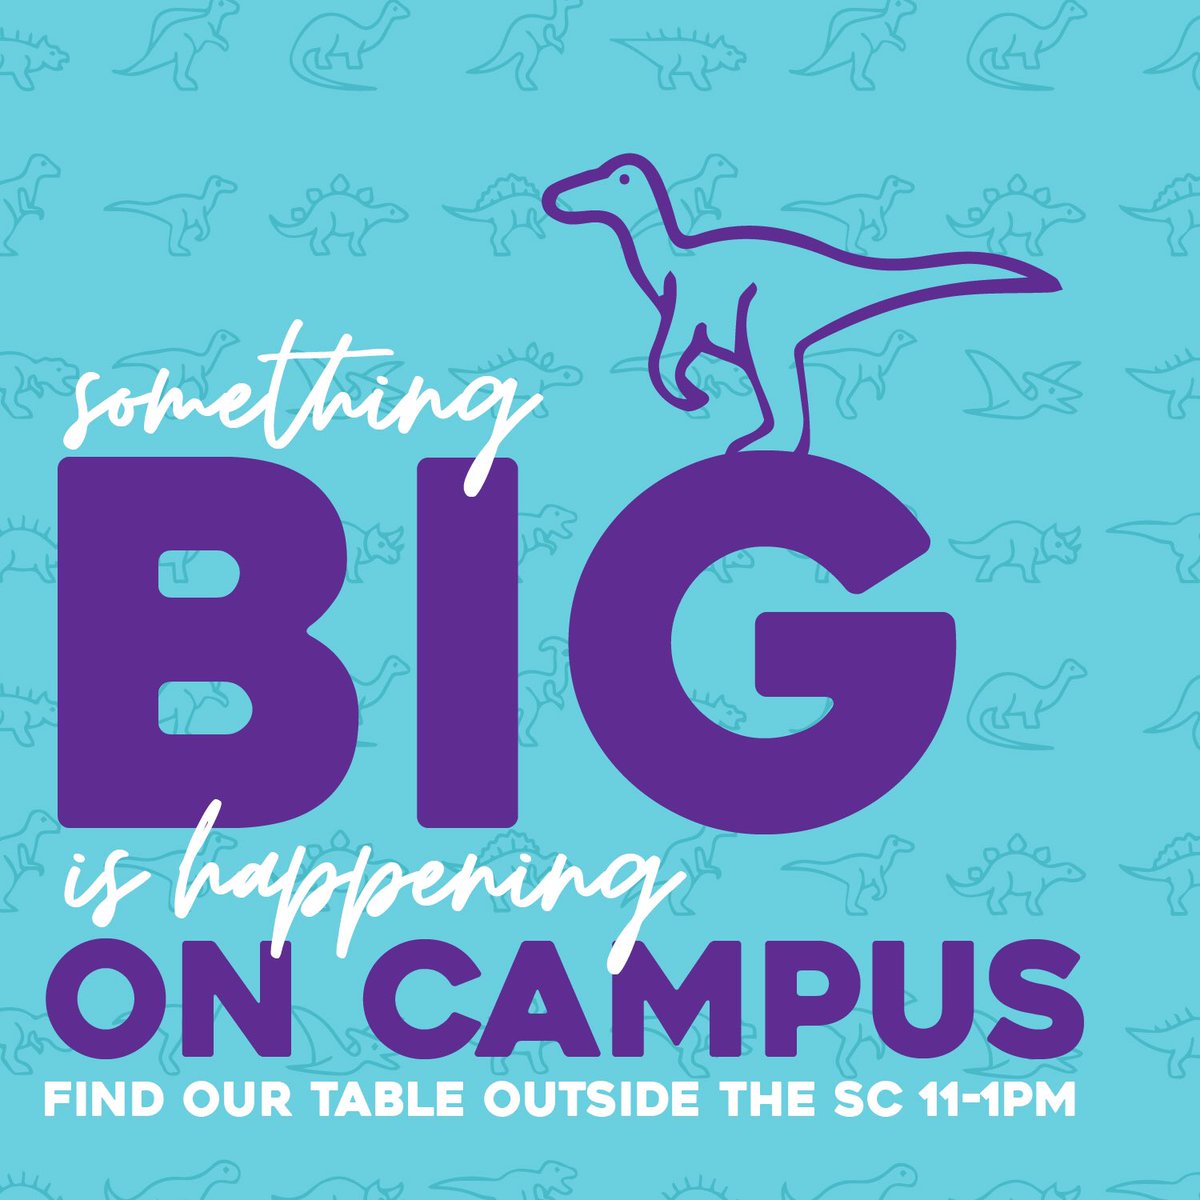 Don’t forget something BIG is happening on campus today!!! Come out and have some fun while learning how to register for the big day! #sfasu #axeem #thebigevent #givebacktonac #refusetogoextinct